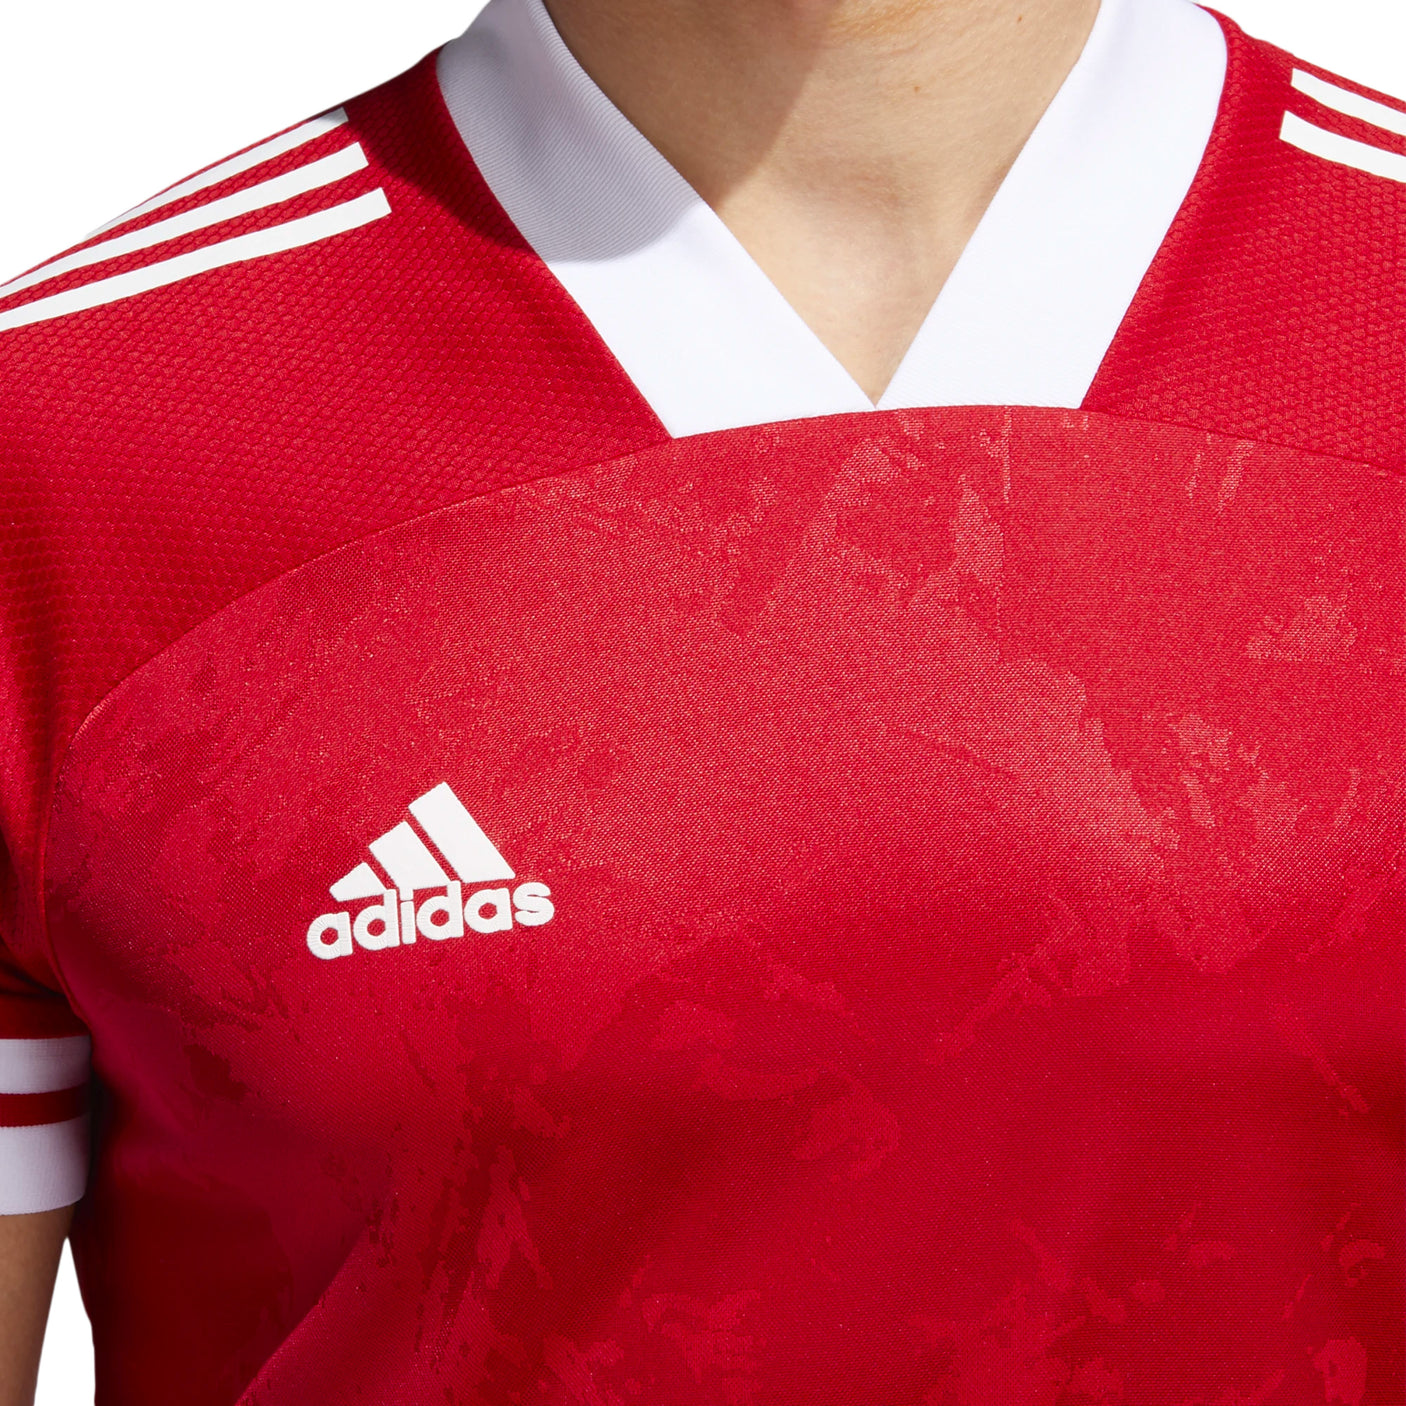 adidas Men's Condivo 20 Jersey Red/White Front Zoomed